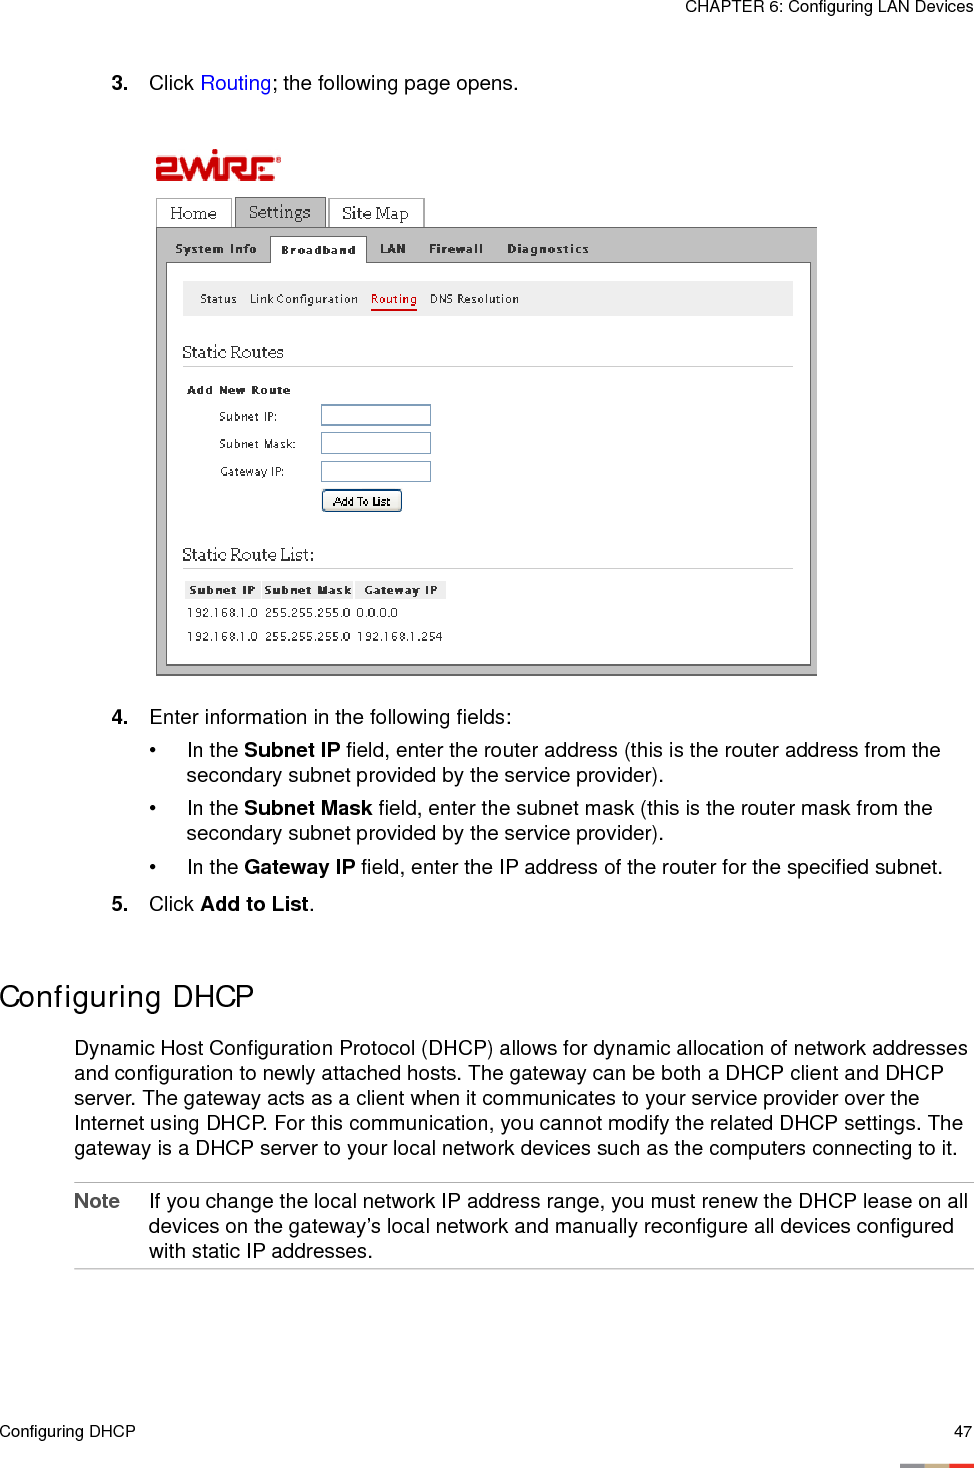 Configuring DHCP 47CHAPTER 6: Configuring LAN Devices3. Click Routing; the following page opens. 4. Enter information in the following fields:• In the Subnet IP field, enter the router address (this is the router address from the secondary subnet provided by the service provider). • In the Subnet Mask field, enter the subnet mask (this is the router mask from the secondary subnet provided by the service provider).• In the Gateway IP field, enter the IP address of the router for the specified subnet.5. Click Add to List.Configuring DHCPDynamic Host Configuration Protocol (DHCP) allows for dynamic allocation of network addresses and configuration to newly attached hosts. The gateway can be both a DHCP client and DHCP server. The gateway acts as a client when it communicates to your service provider over the Internet using DHCP. For this communication, you cannot modify the related DHCP settings. The gateway is a DHCP server to your local network devices such as the computers connecting to it. Note If you change the local network IP address range, you must renew the DHCP lease on all devices on the gateway’s local network and manually reconfigure all devices configured with static IP addresses.